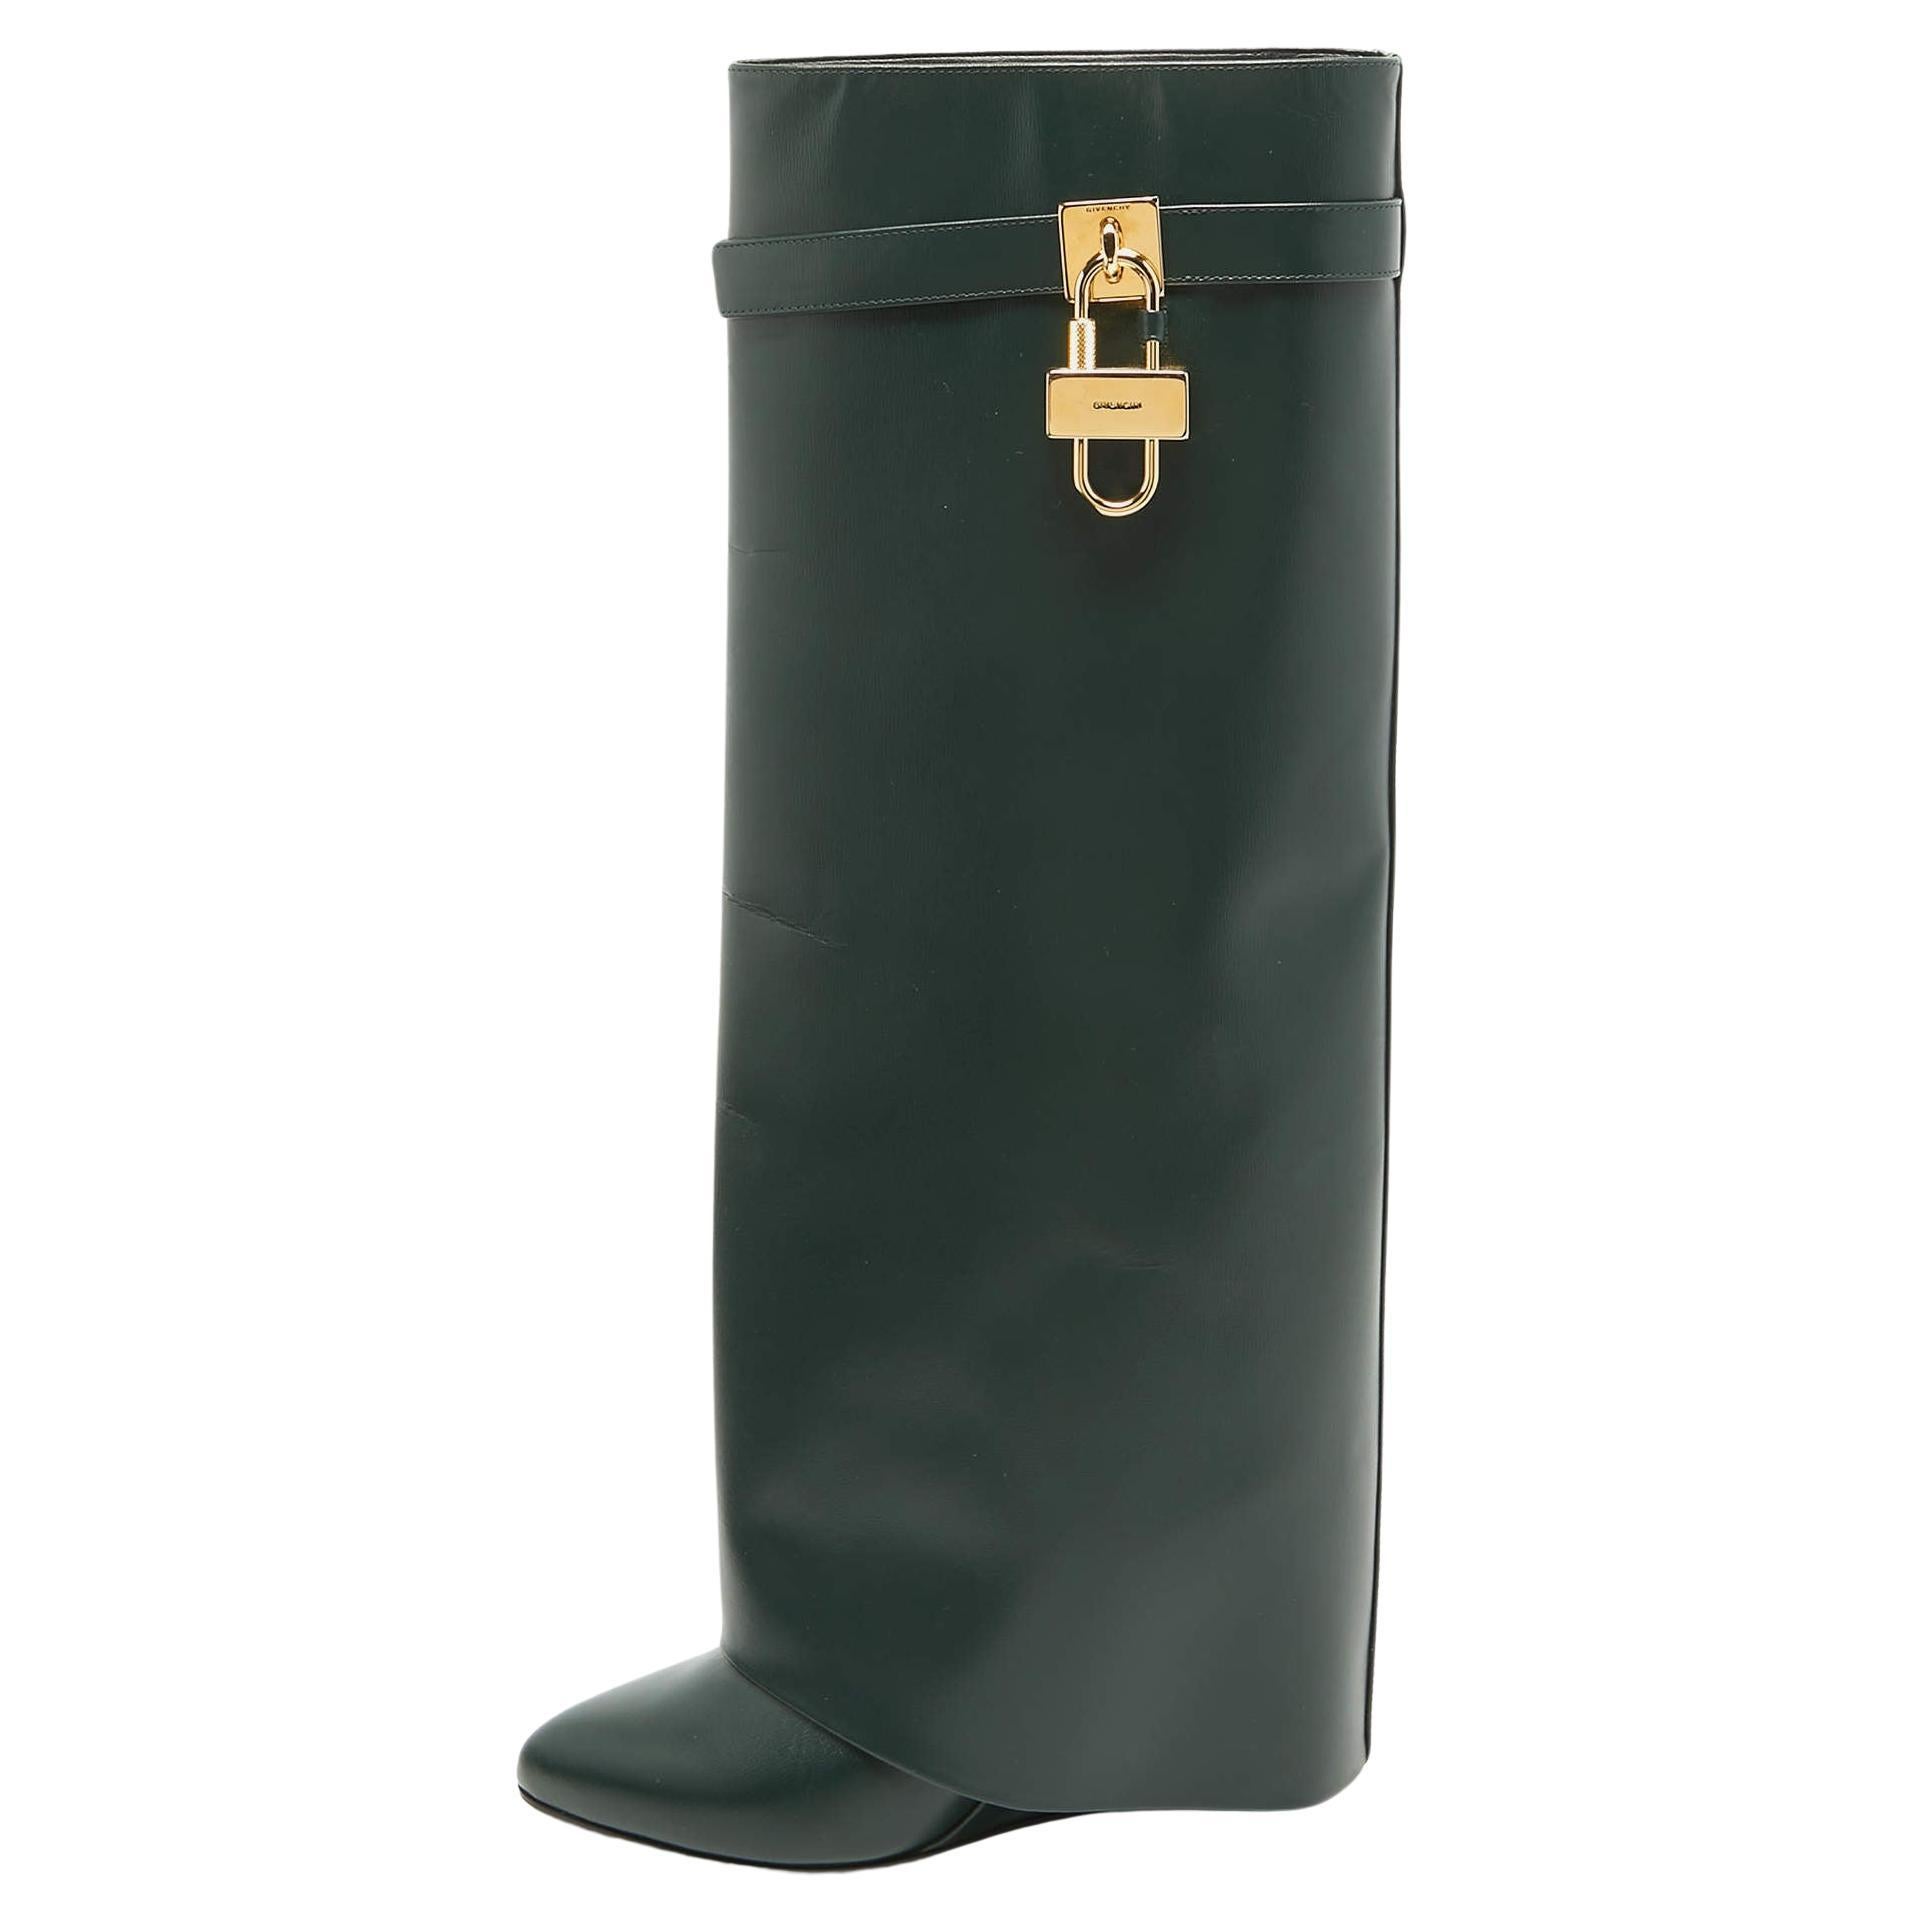 Givenchy Green Leather Shark Lock Wedge Knee Length Boots Size 40